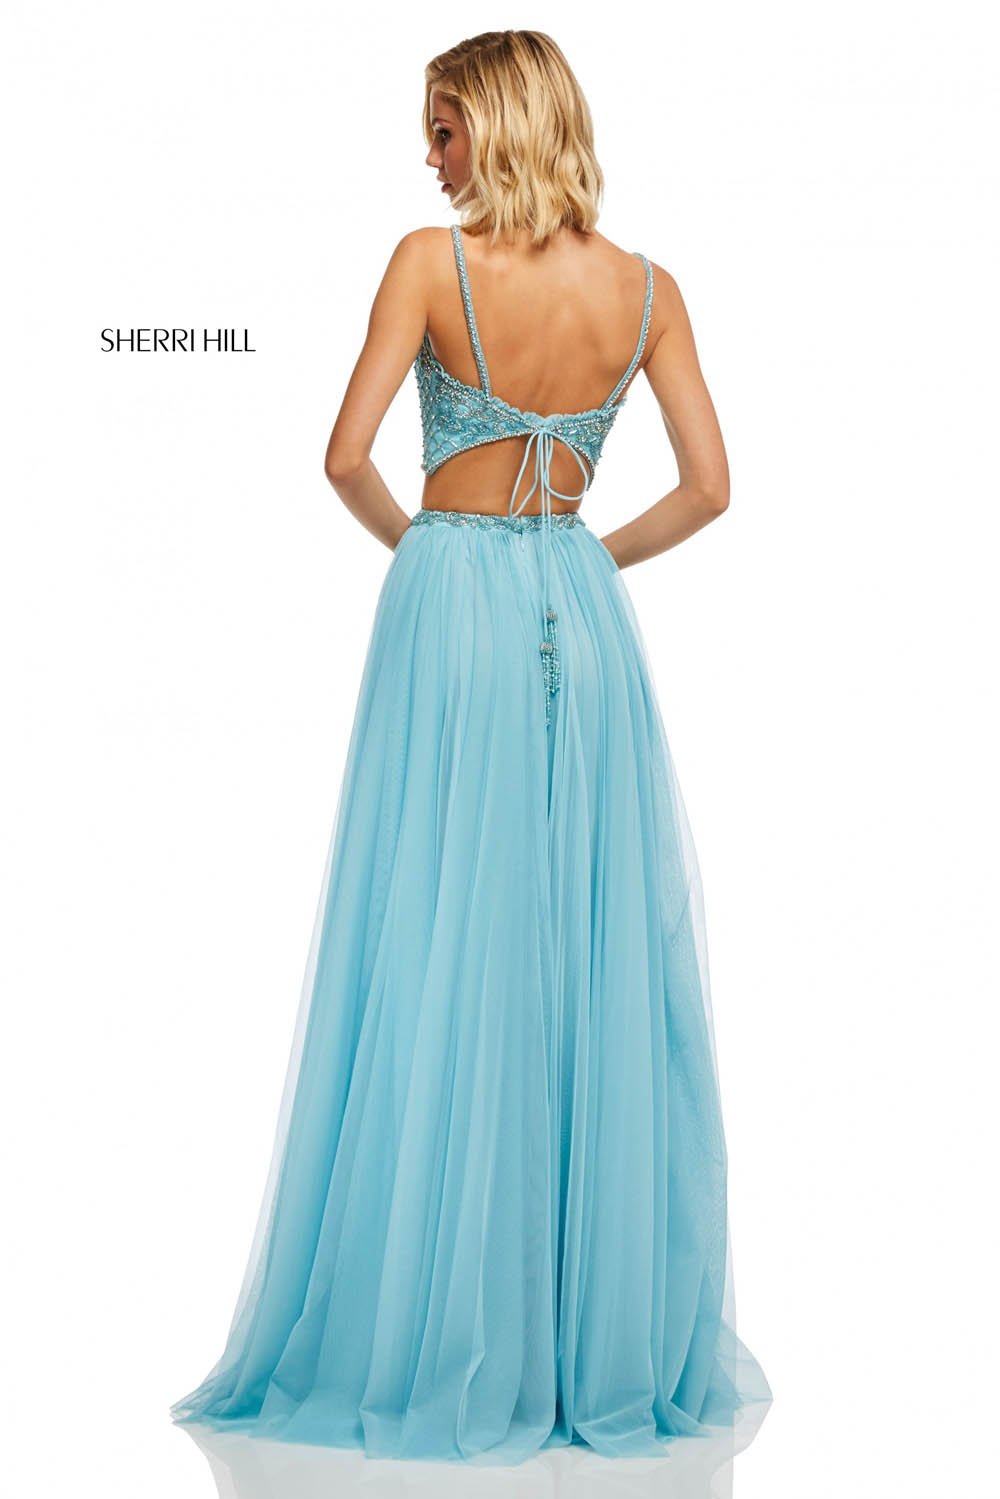 Sherri Hill 52516 dress images in these colors: Light Yellow, Light Pink, Navy, Ivory, Black, Aqua, Light Blue, Lilac, Coral.